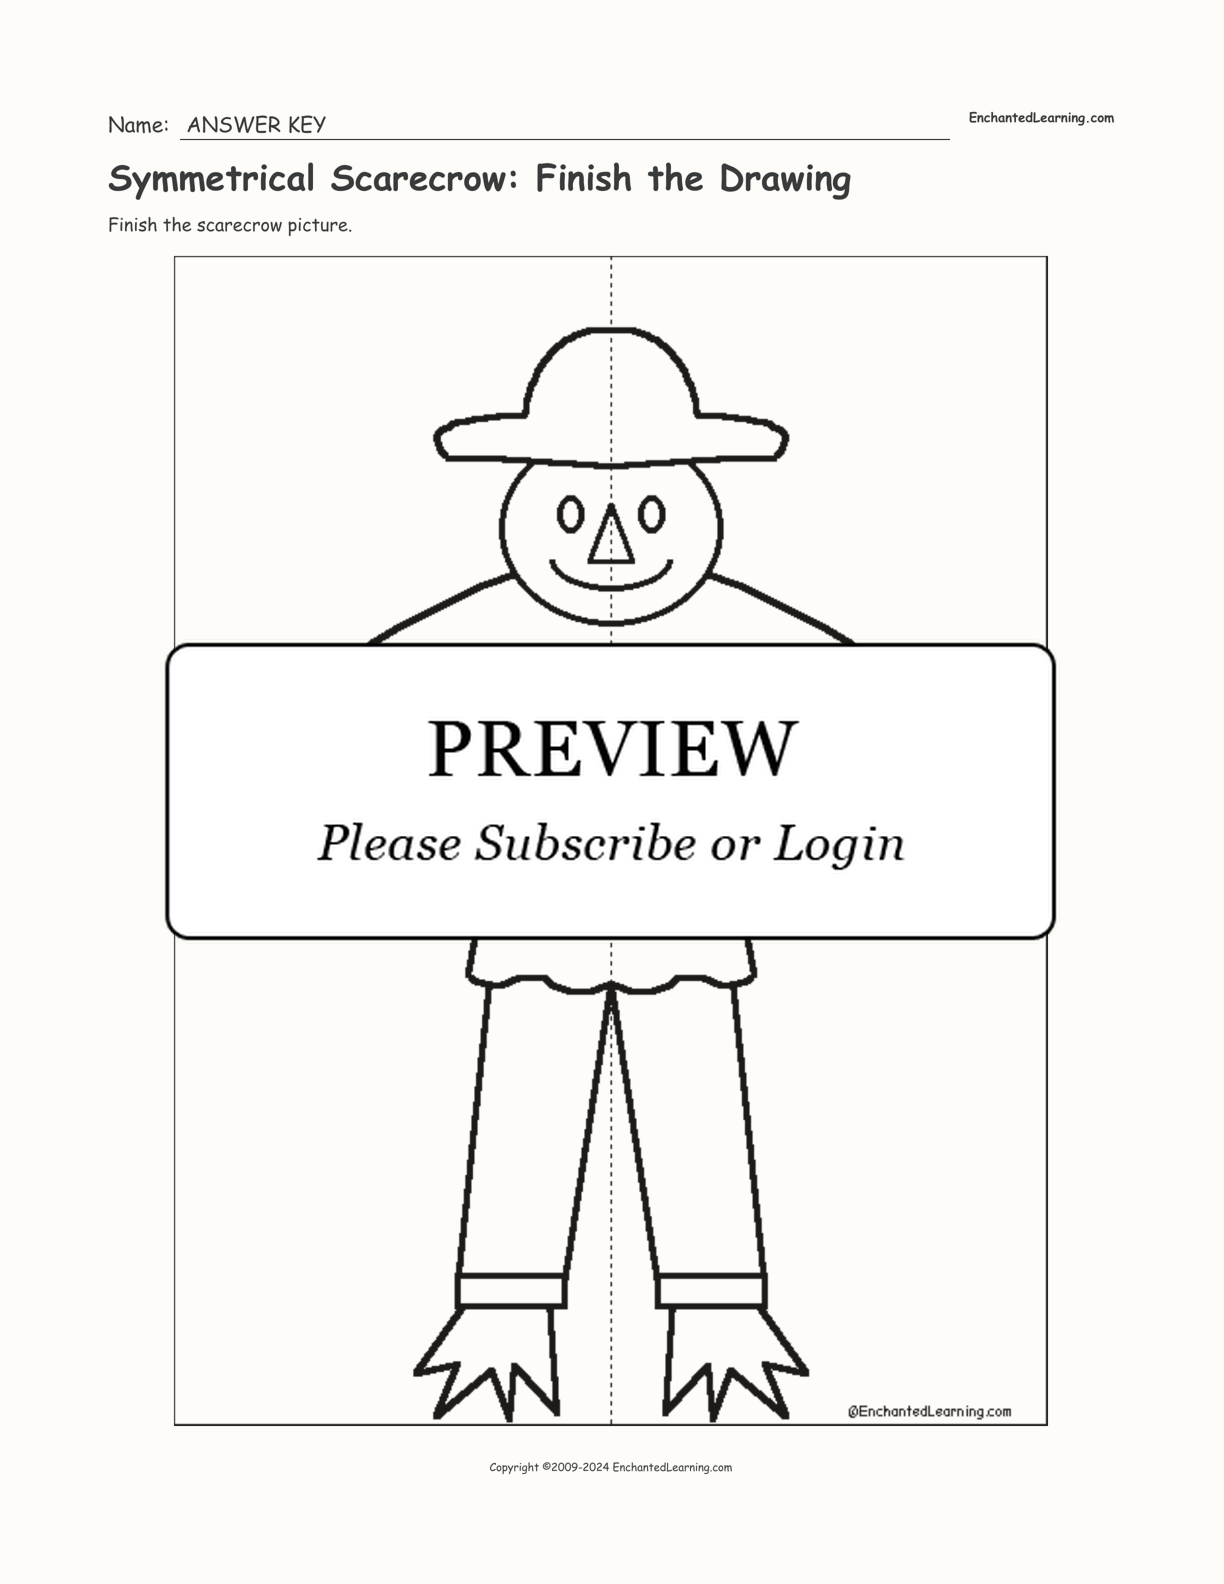 Symmetrical Scarecrow: Finish the Drawing interactive worksheet page 2